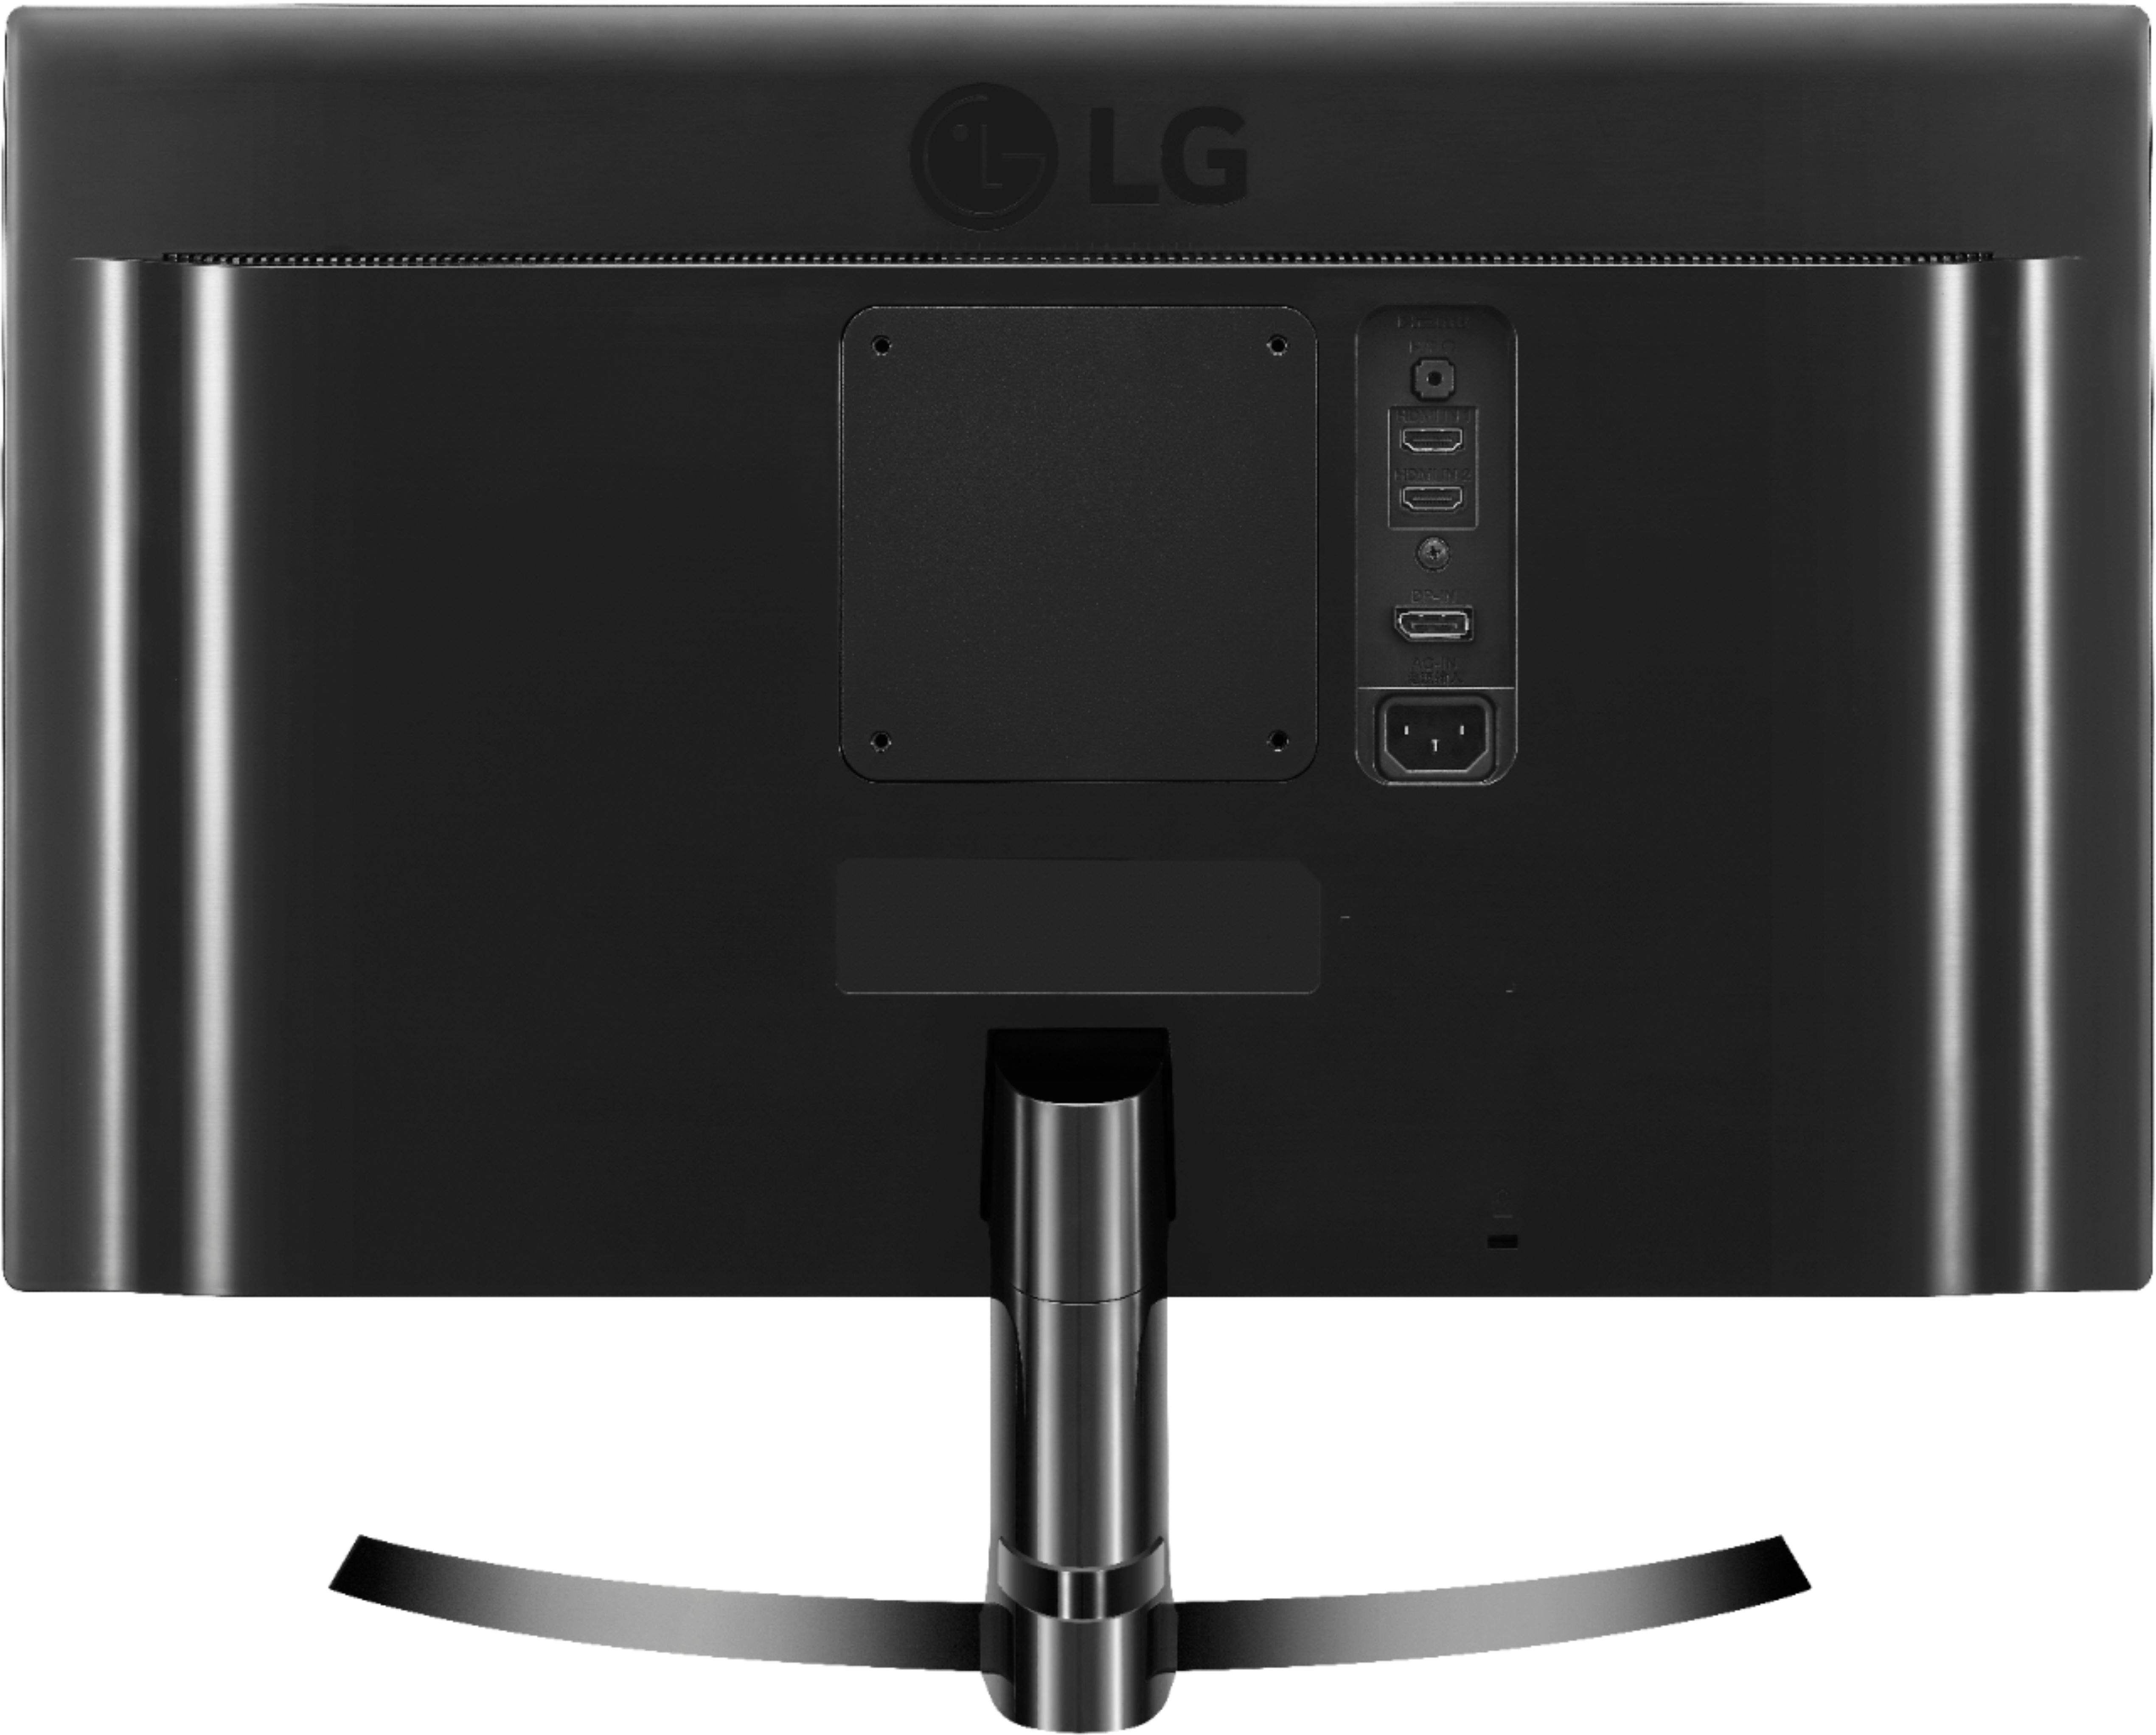 Back View: LG - 7.3 Cu. Ft. Smart Gas Dryer with Sensor Dry - Graphite Steel